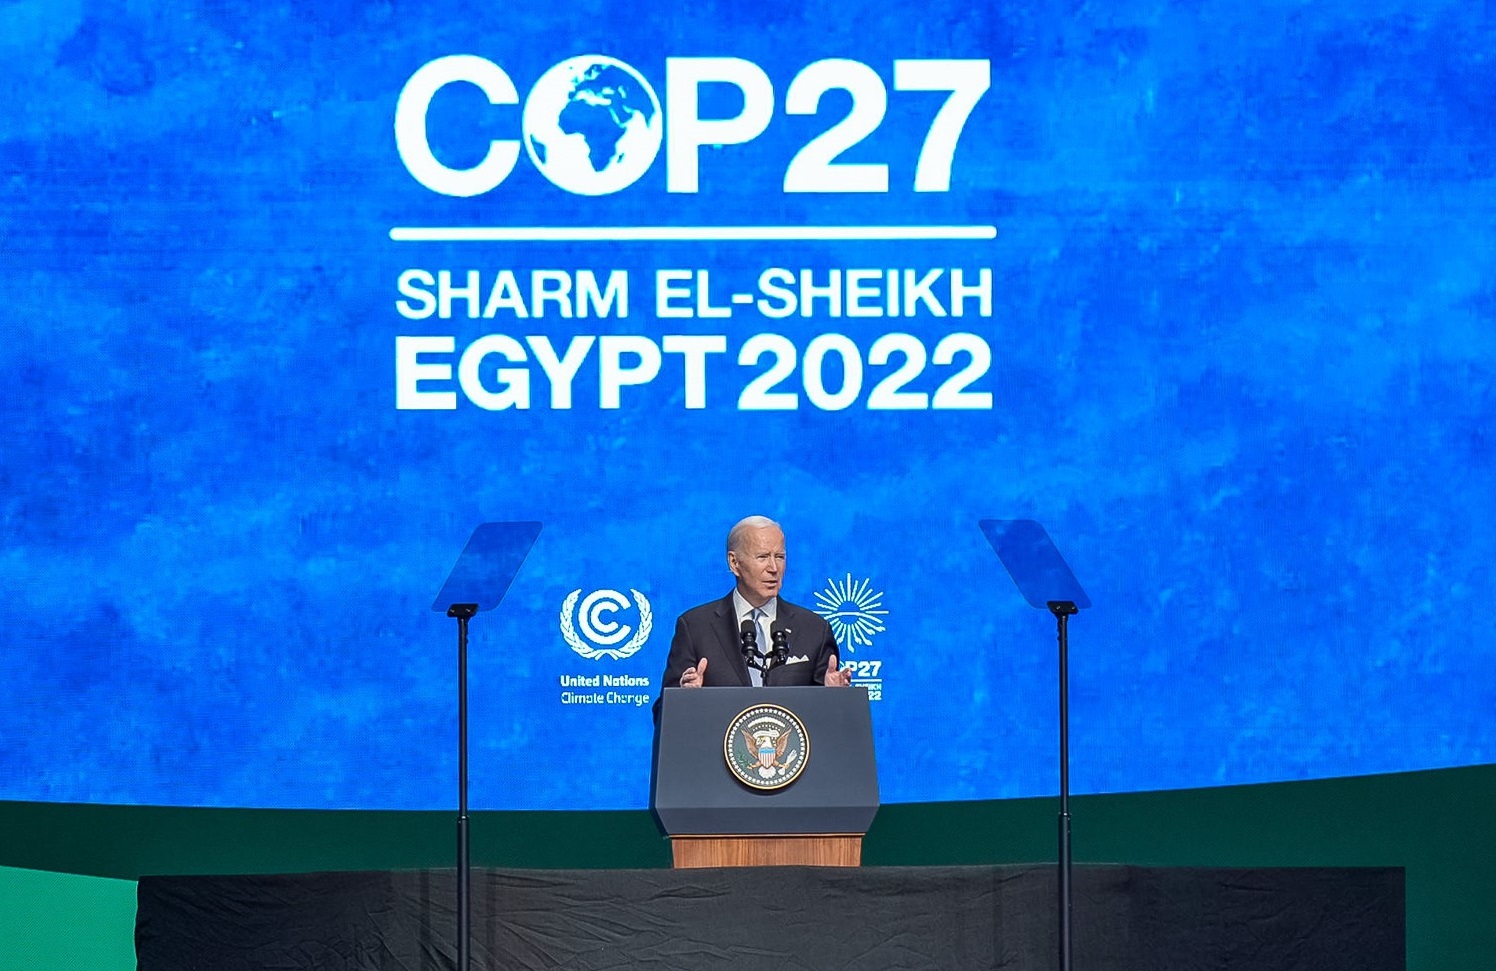 Bild: Office of the President of the United States, Public domain, President Biden talked about climate crisis at the COP 27, via Wikimedia Commons (Bildgröße verändert)